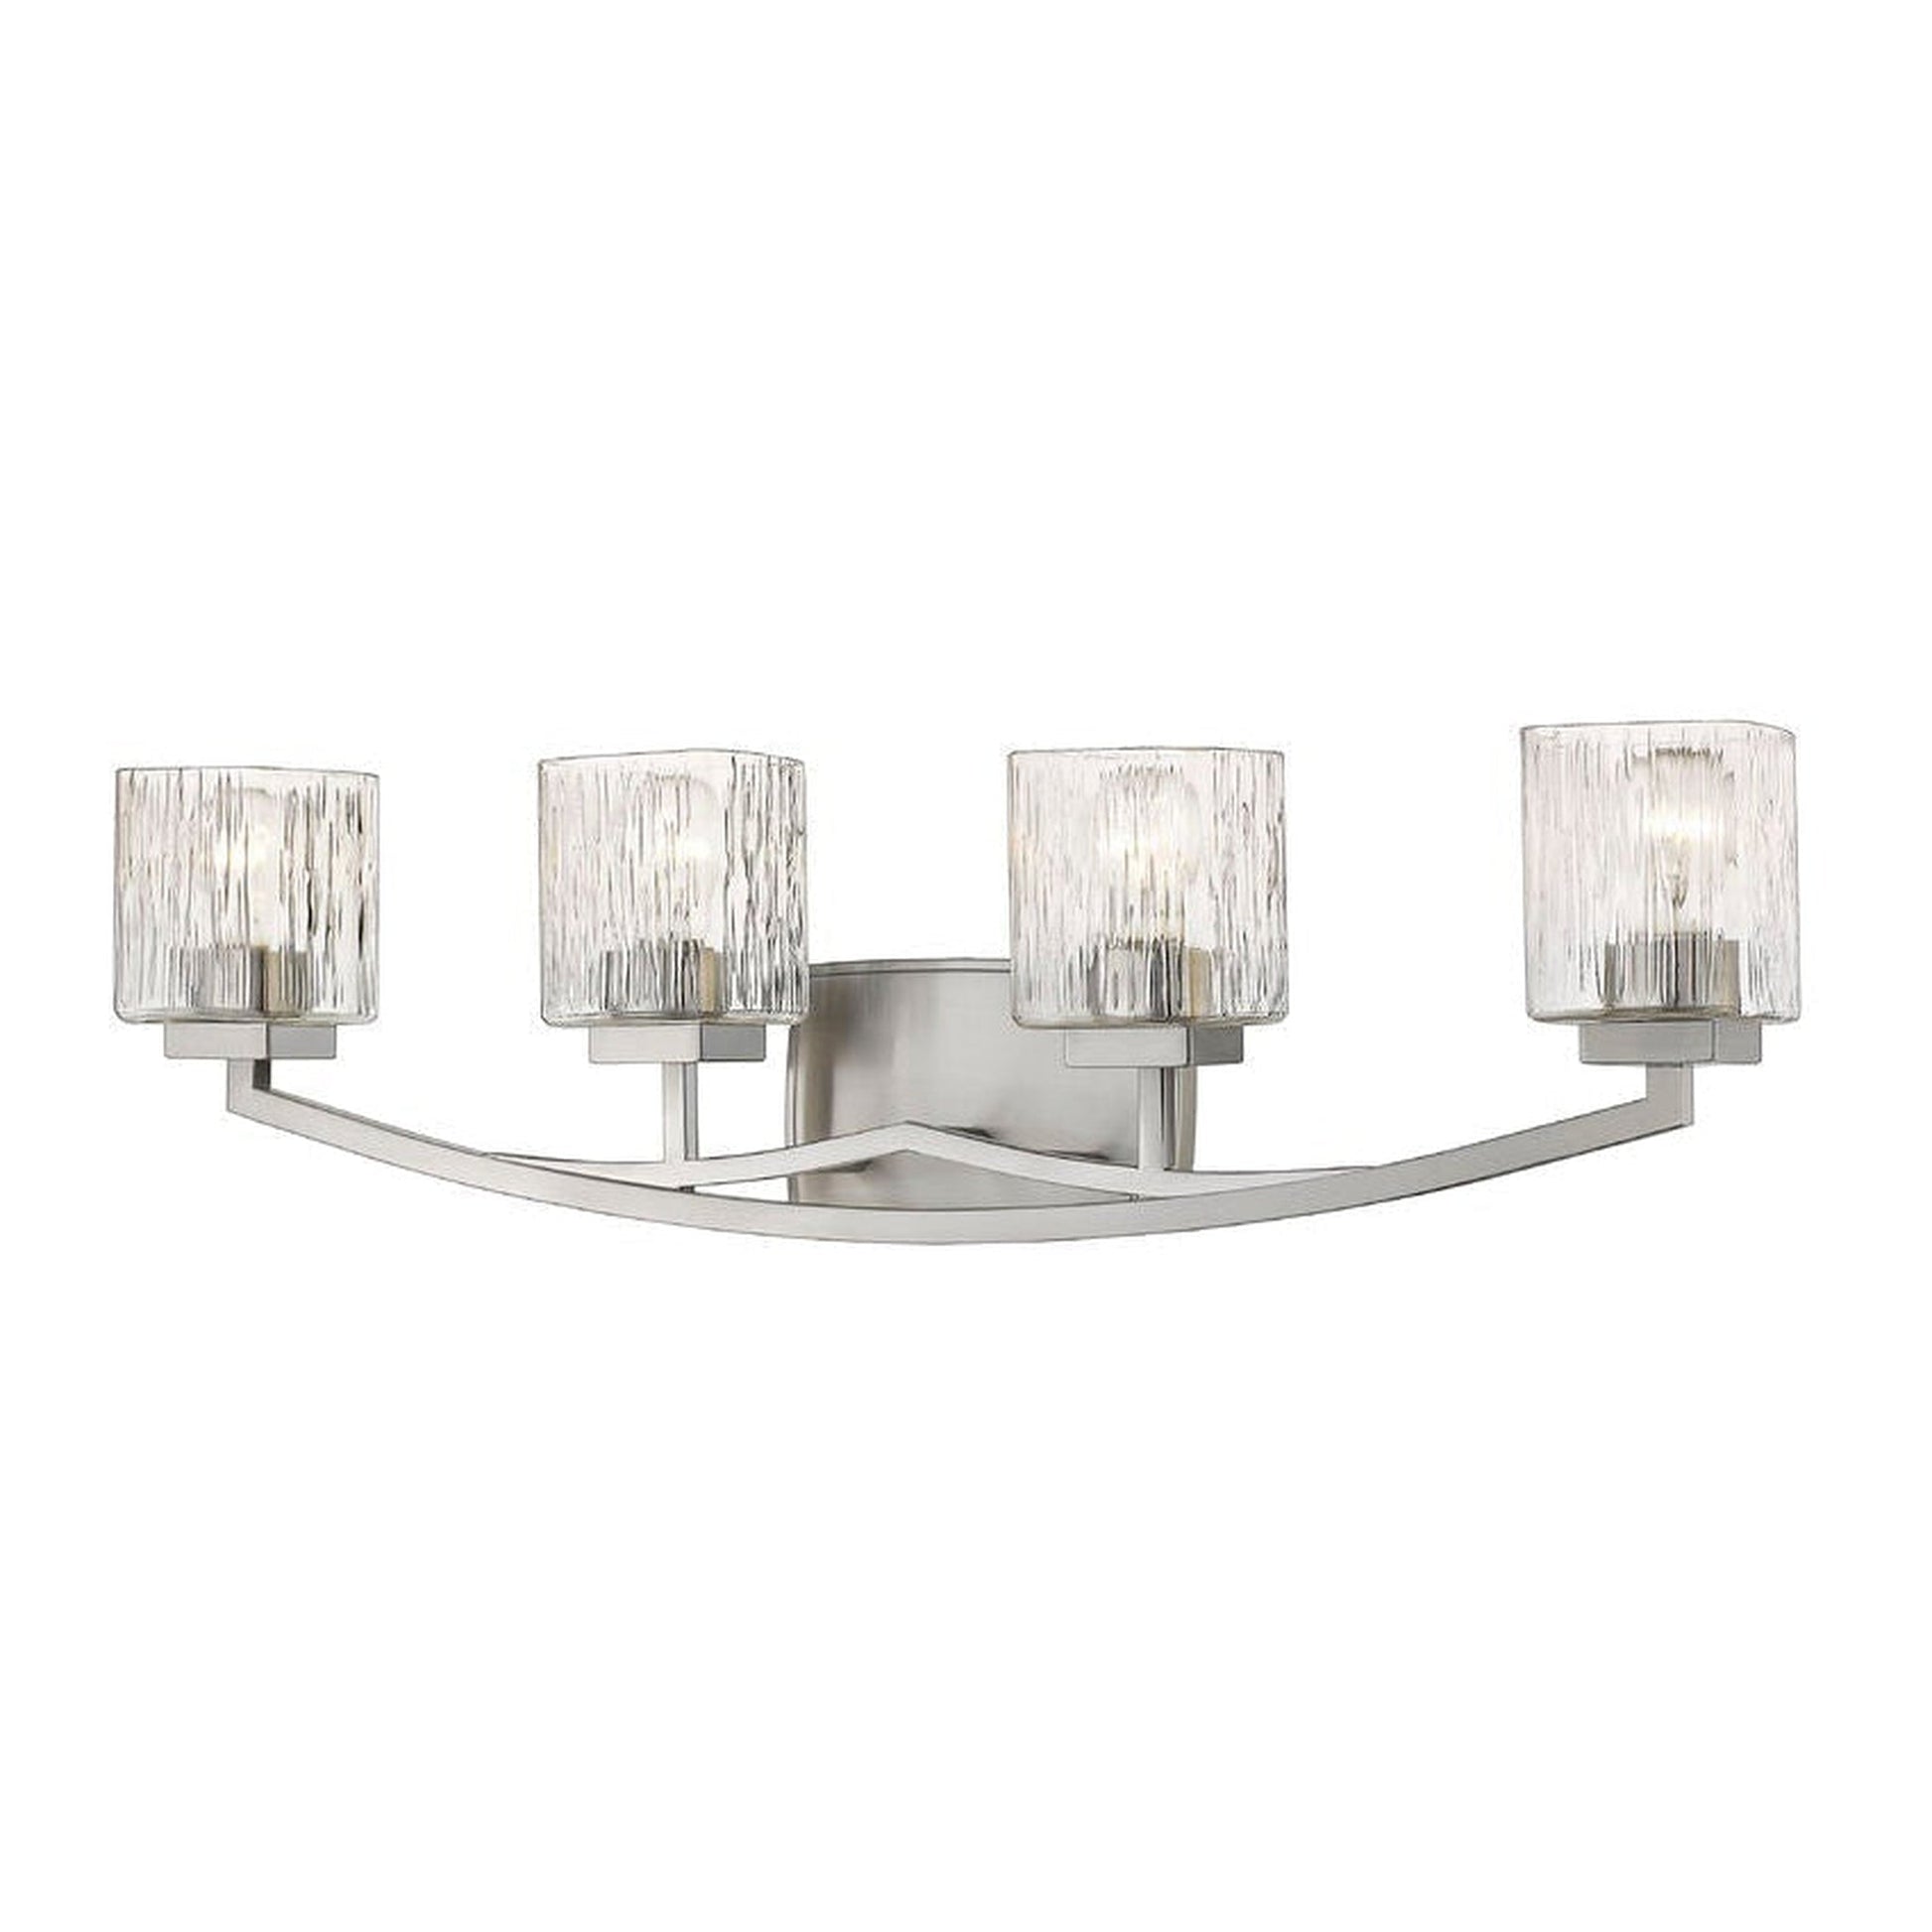 Z-Lite Zaid 32" 4-Light Brushed Nickel Vanity Light With Chisel Glass Shade